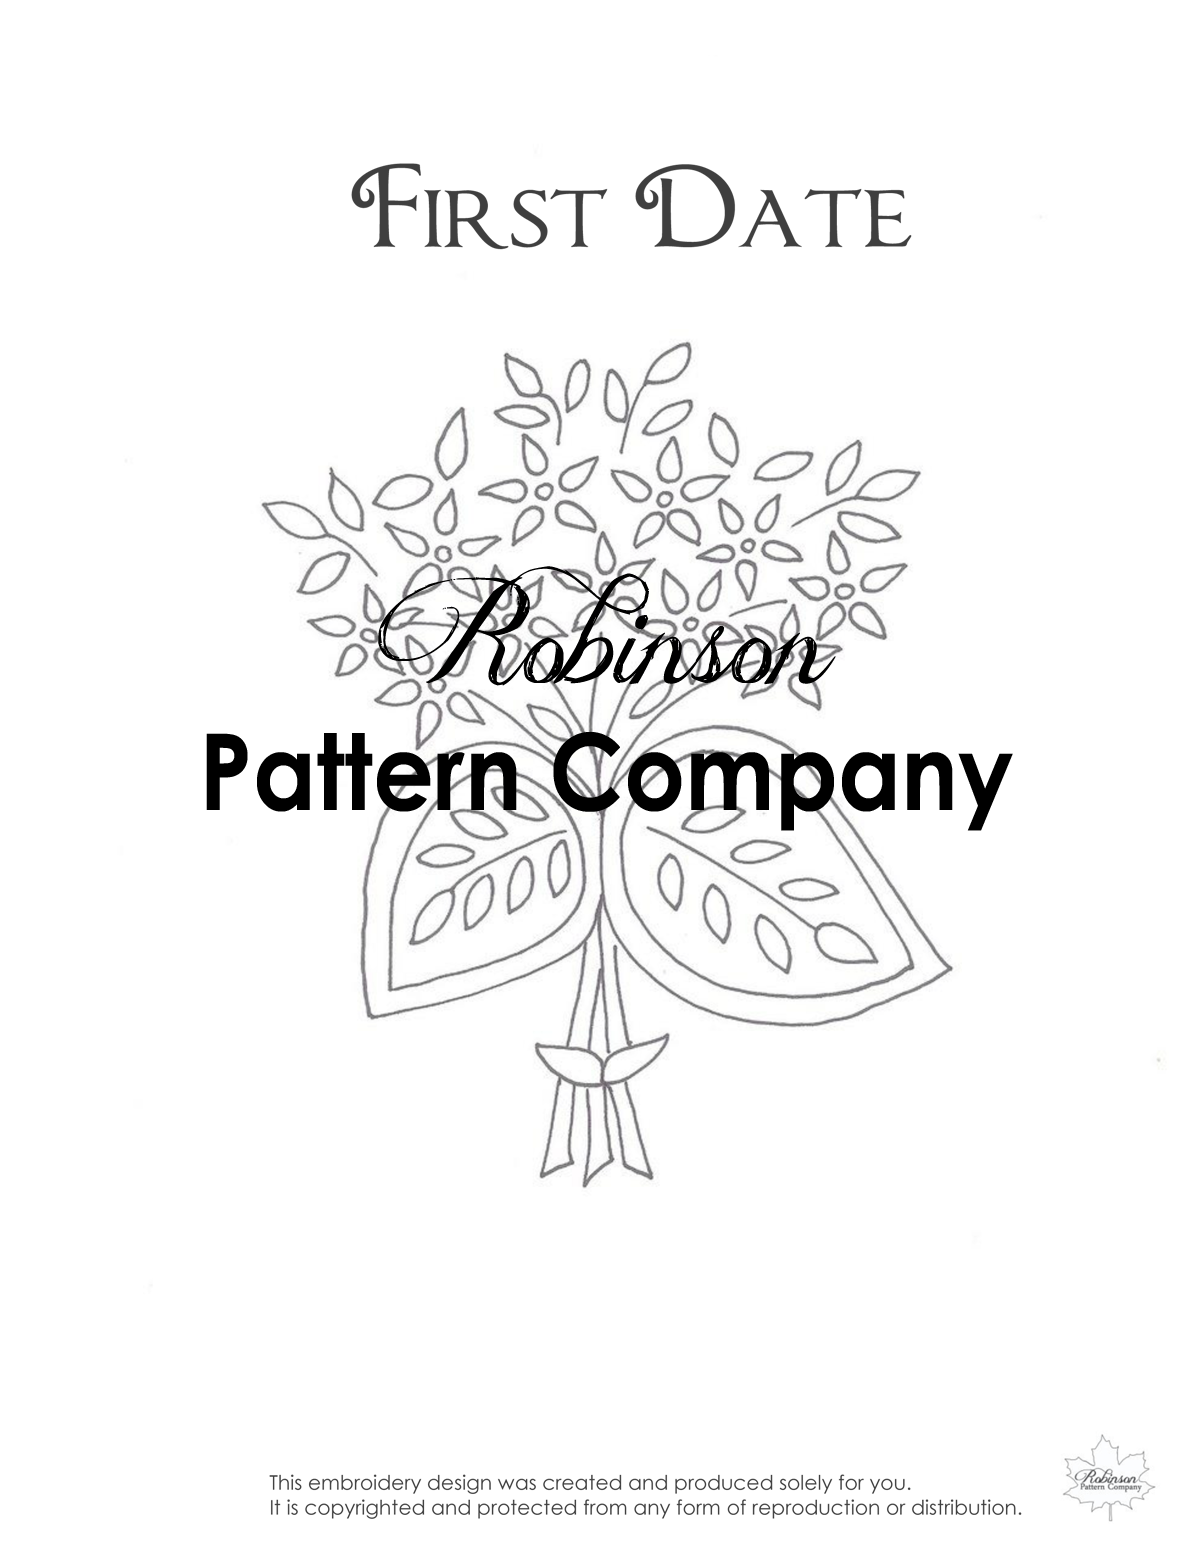 First Date Hand Embroidery pattern